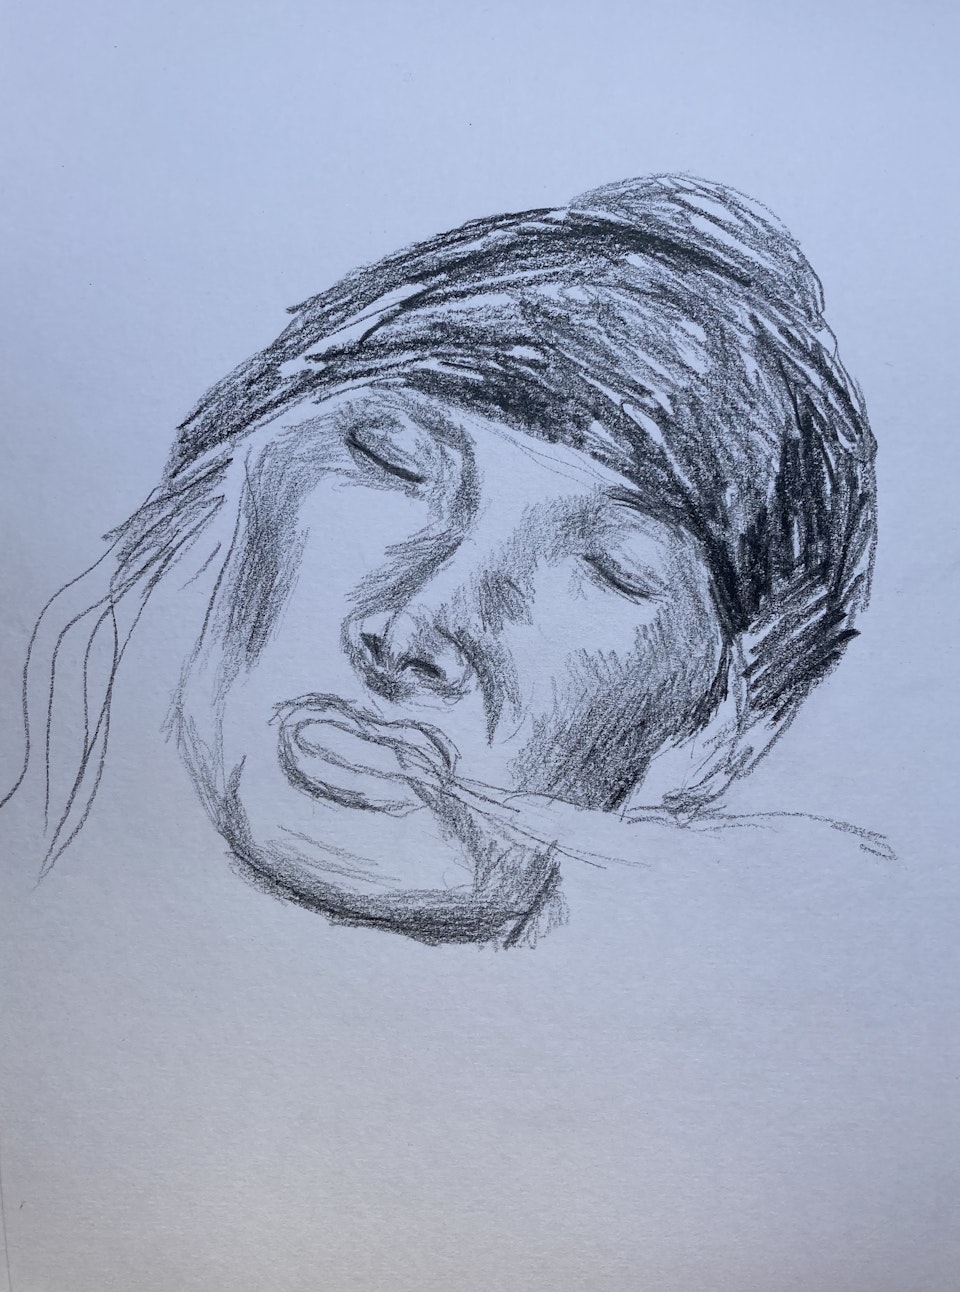 People - Face - 2020 - Pencil on Paper - 21 x 29cm A4